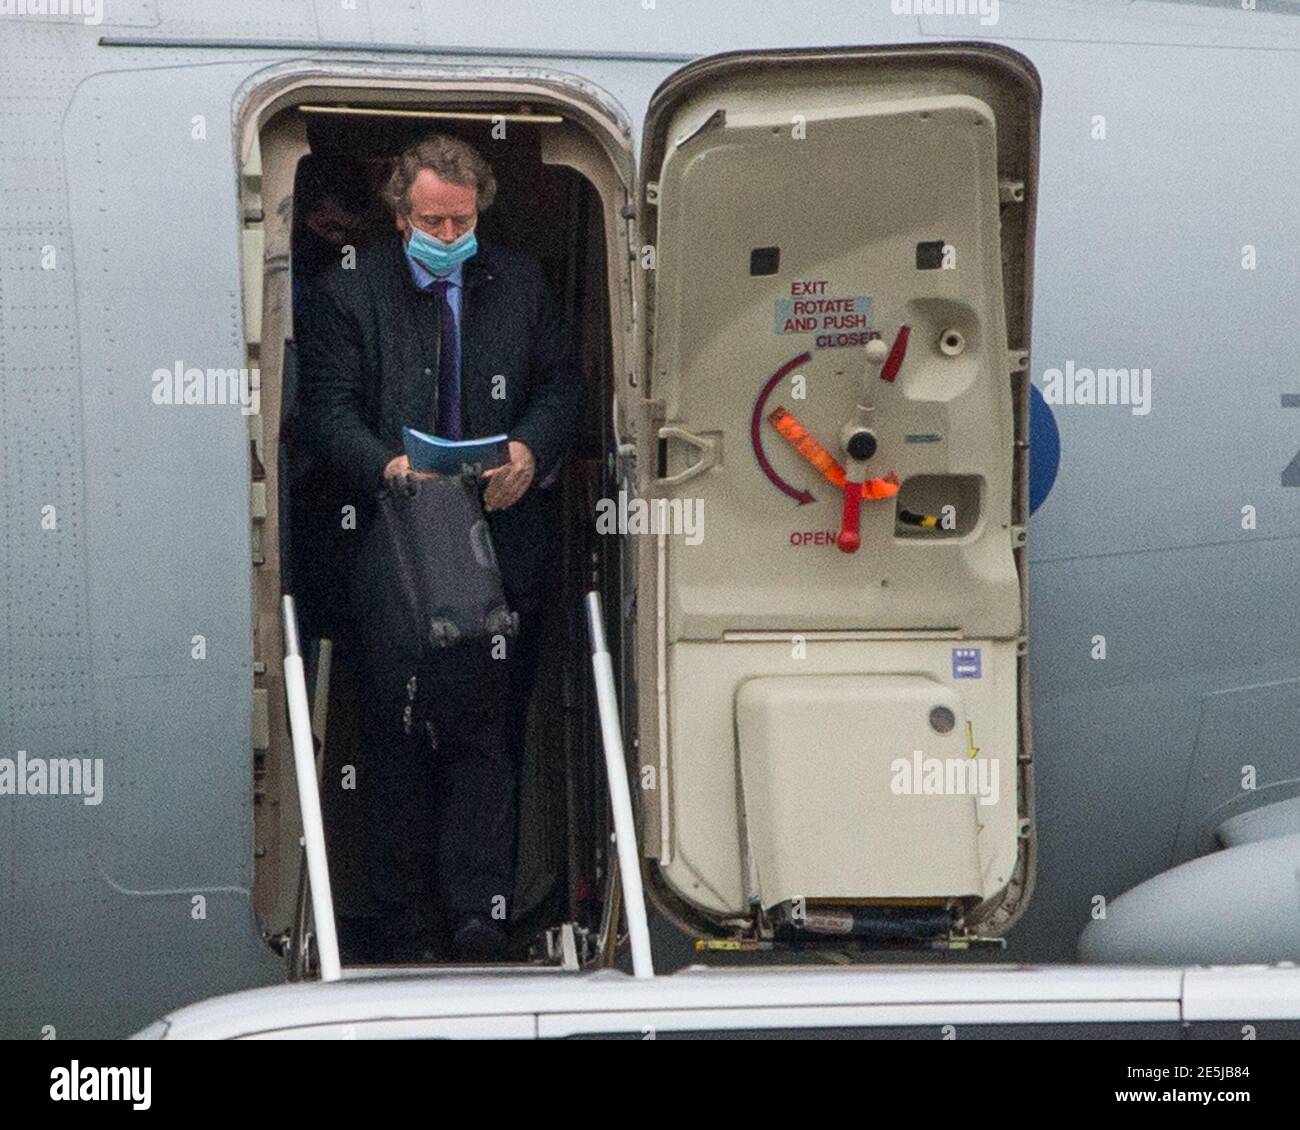 Glasgow, Scotland, UK. 28th Jan, 2021. Pictured: Rt Hon Alister Jack MP, Secretary of State for Scotland. The UK Prime Minister Boris Johnson arrives off his plane at Glasgow Airport signalling the start of his Scotland visit. His visit has been parred by controversy due to the travel ban which the Scottish First Minister Nicola Sturgeon has put in place questioning if the PM's visit is an essential journey or not. Mr Johnson is up on important business to maintain the ties with the union. Credit: Colin Fisher/Alamy Live News Stock Photo